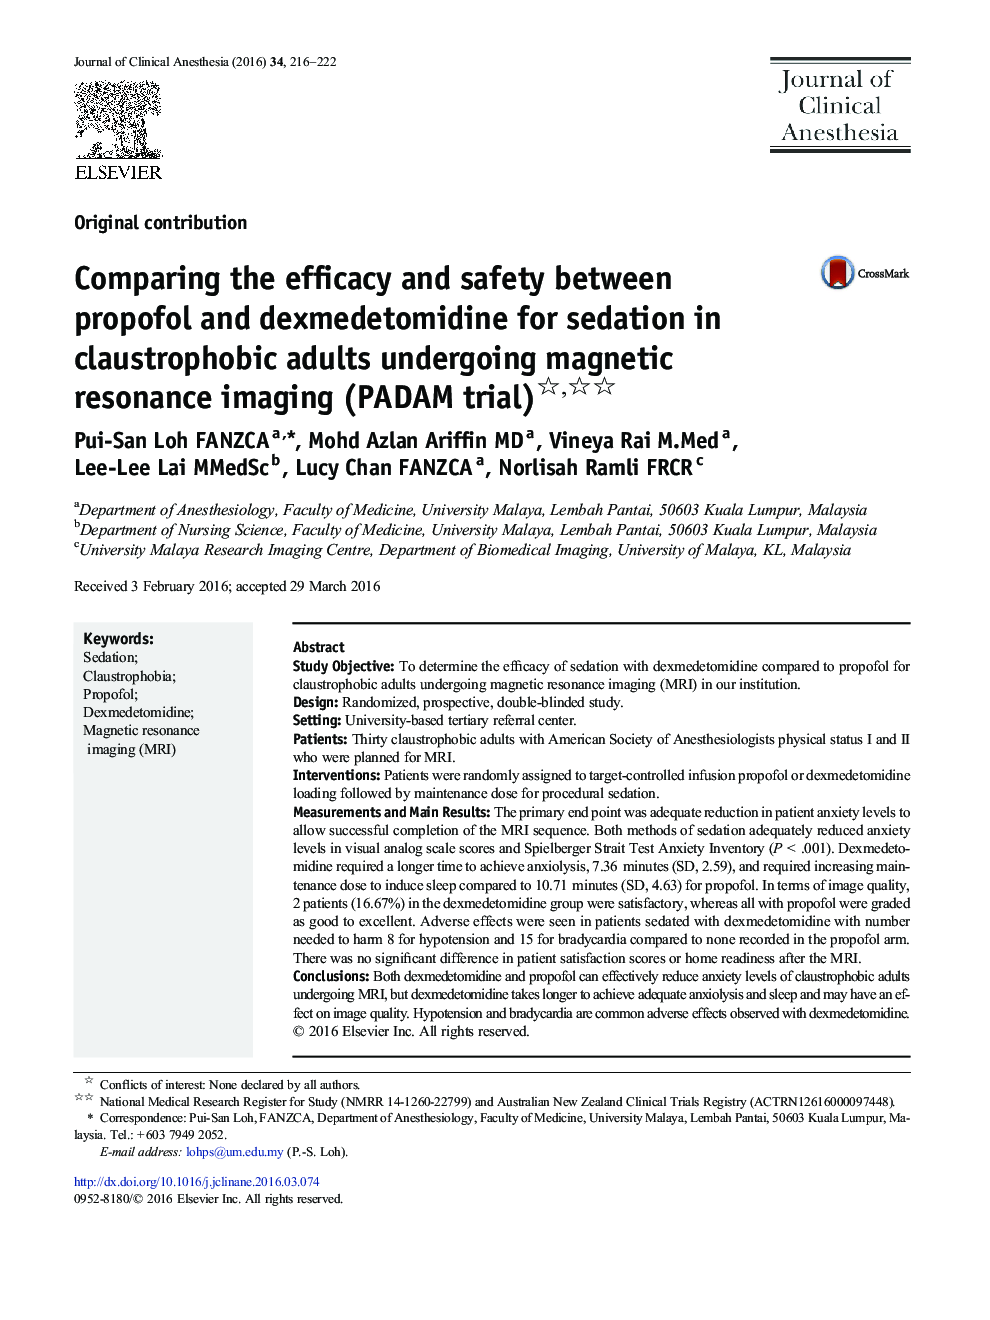 Comparing the efficacy and safety between propofol and dexmedetomidine for sedation in claustrophobic adults undergoing magnetic resonance imaging (PADAM trial)